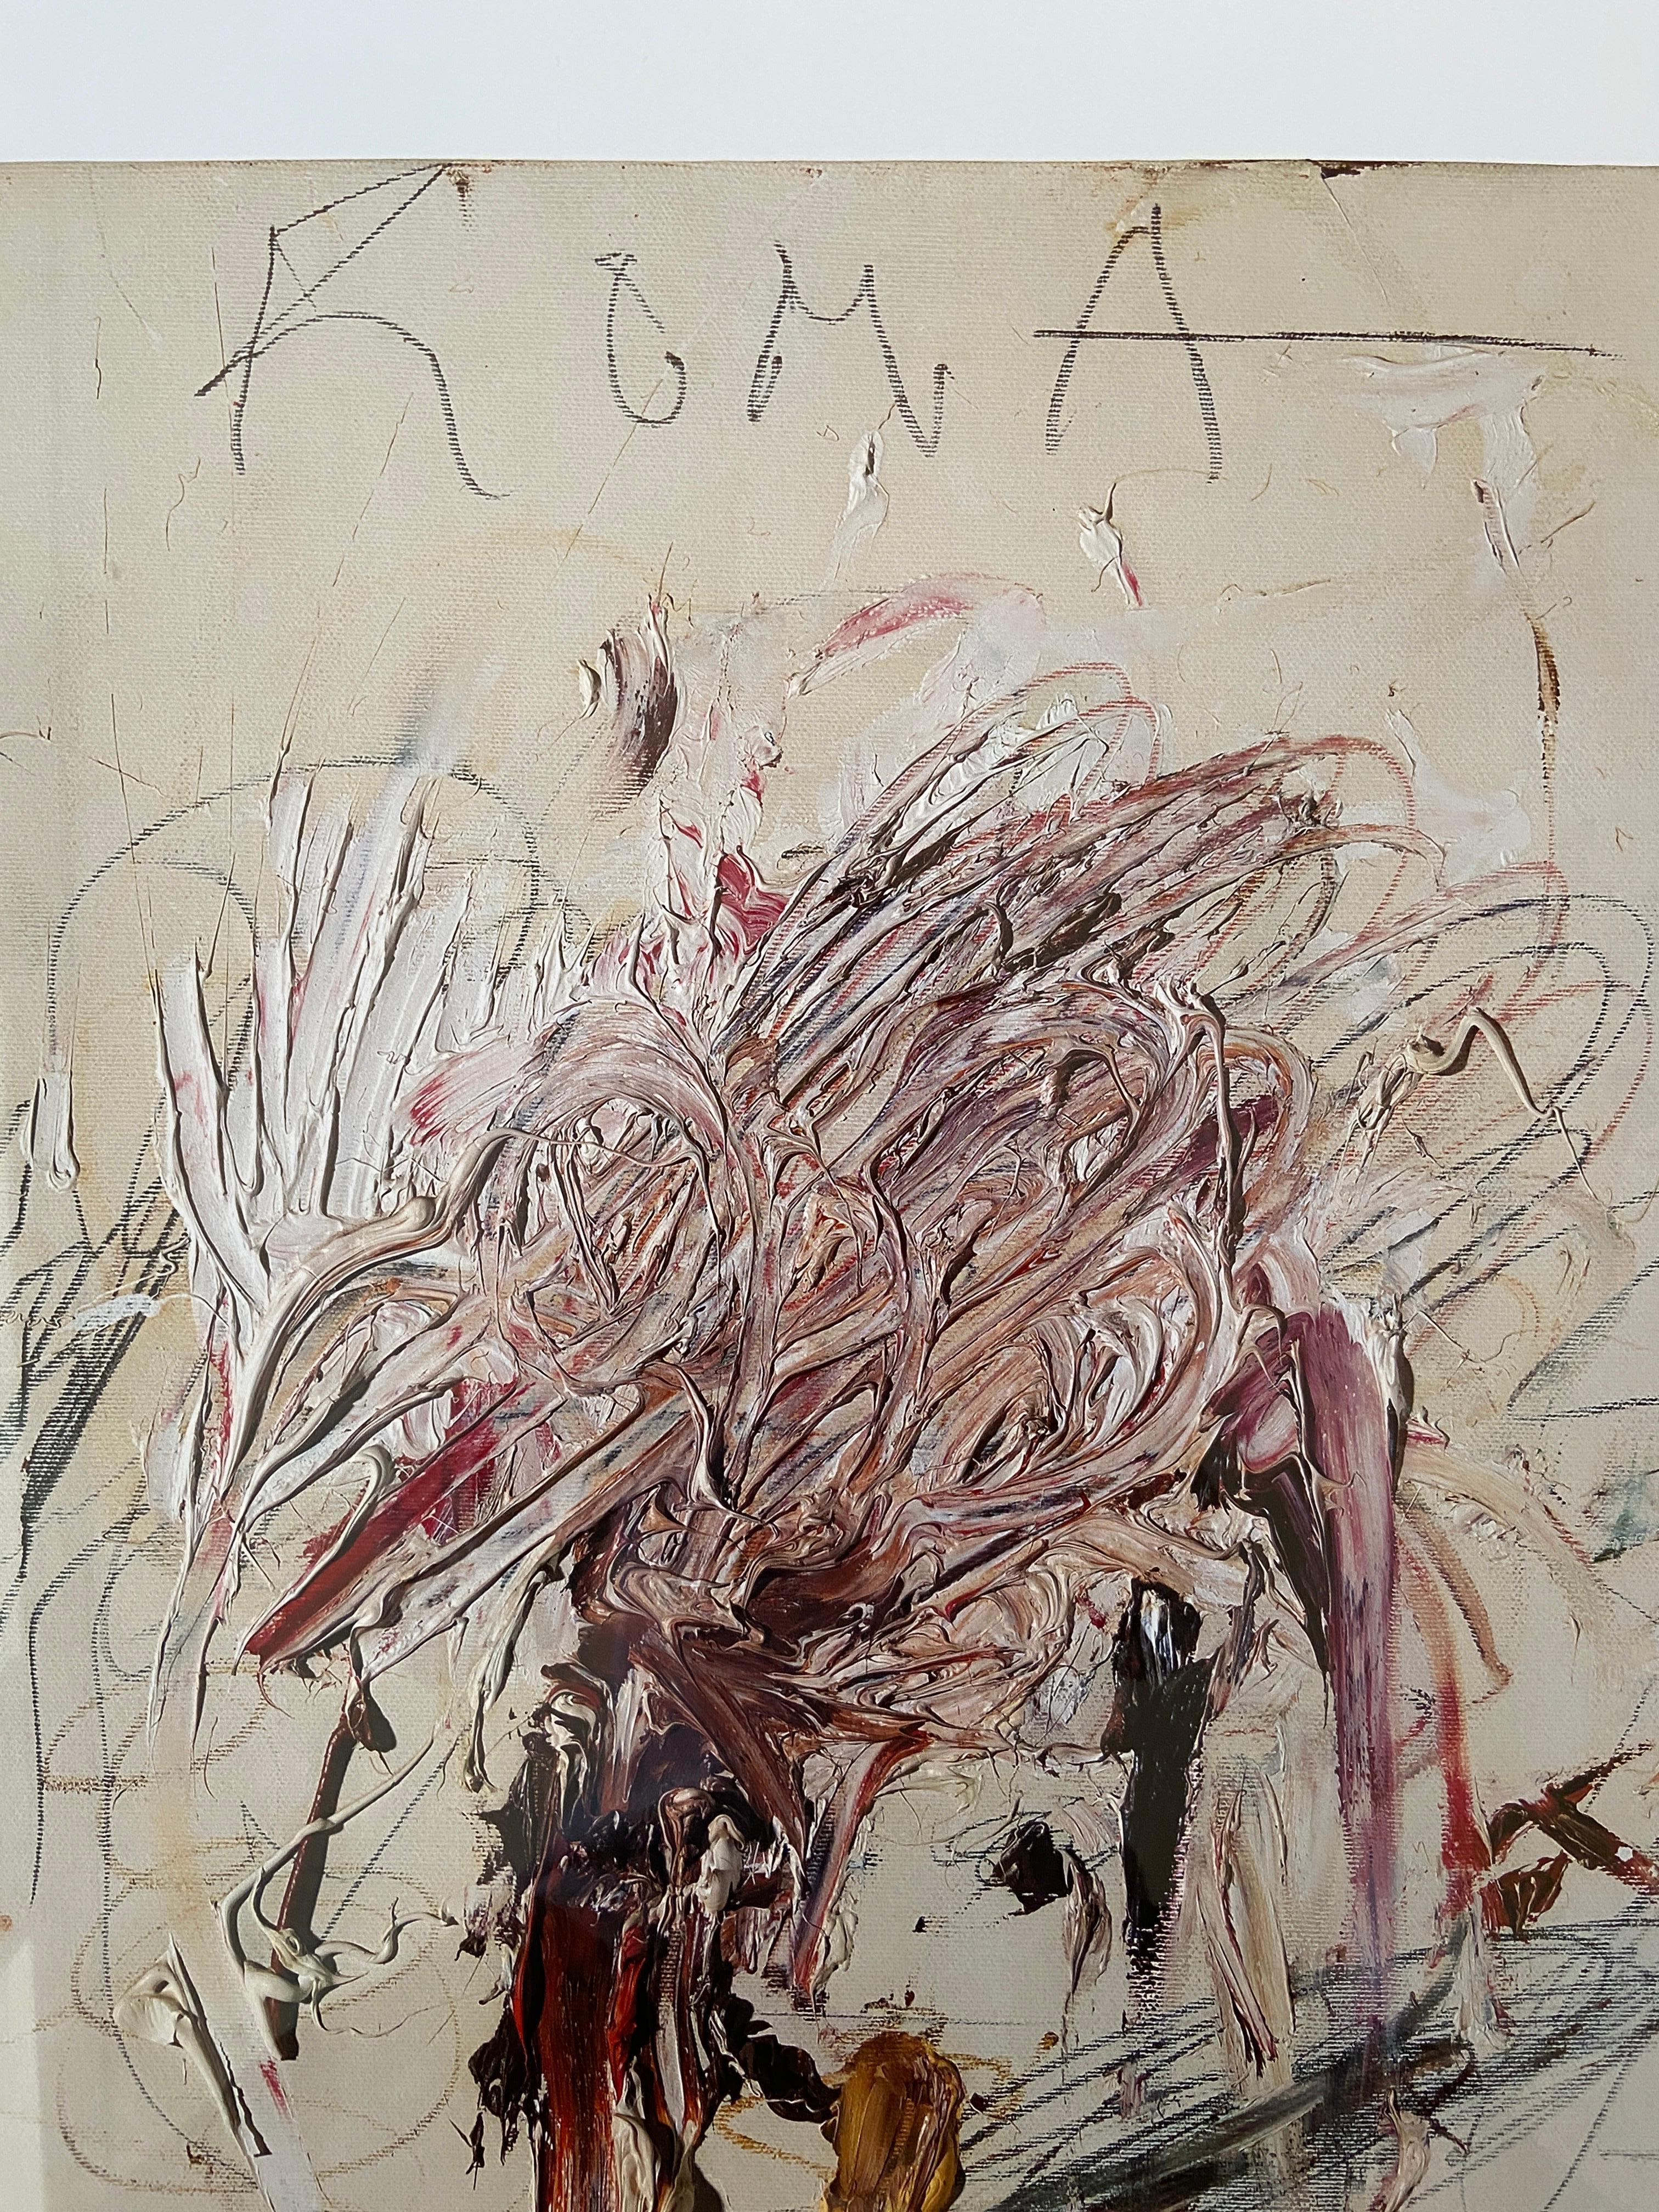 Other Vintage Cy Twombly Galerie Karsten Greve Exhibition Poster, Germany, 1997